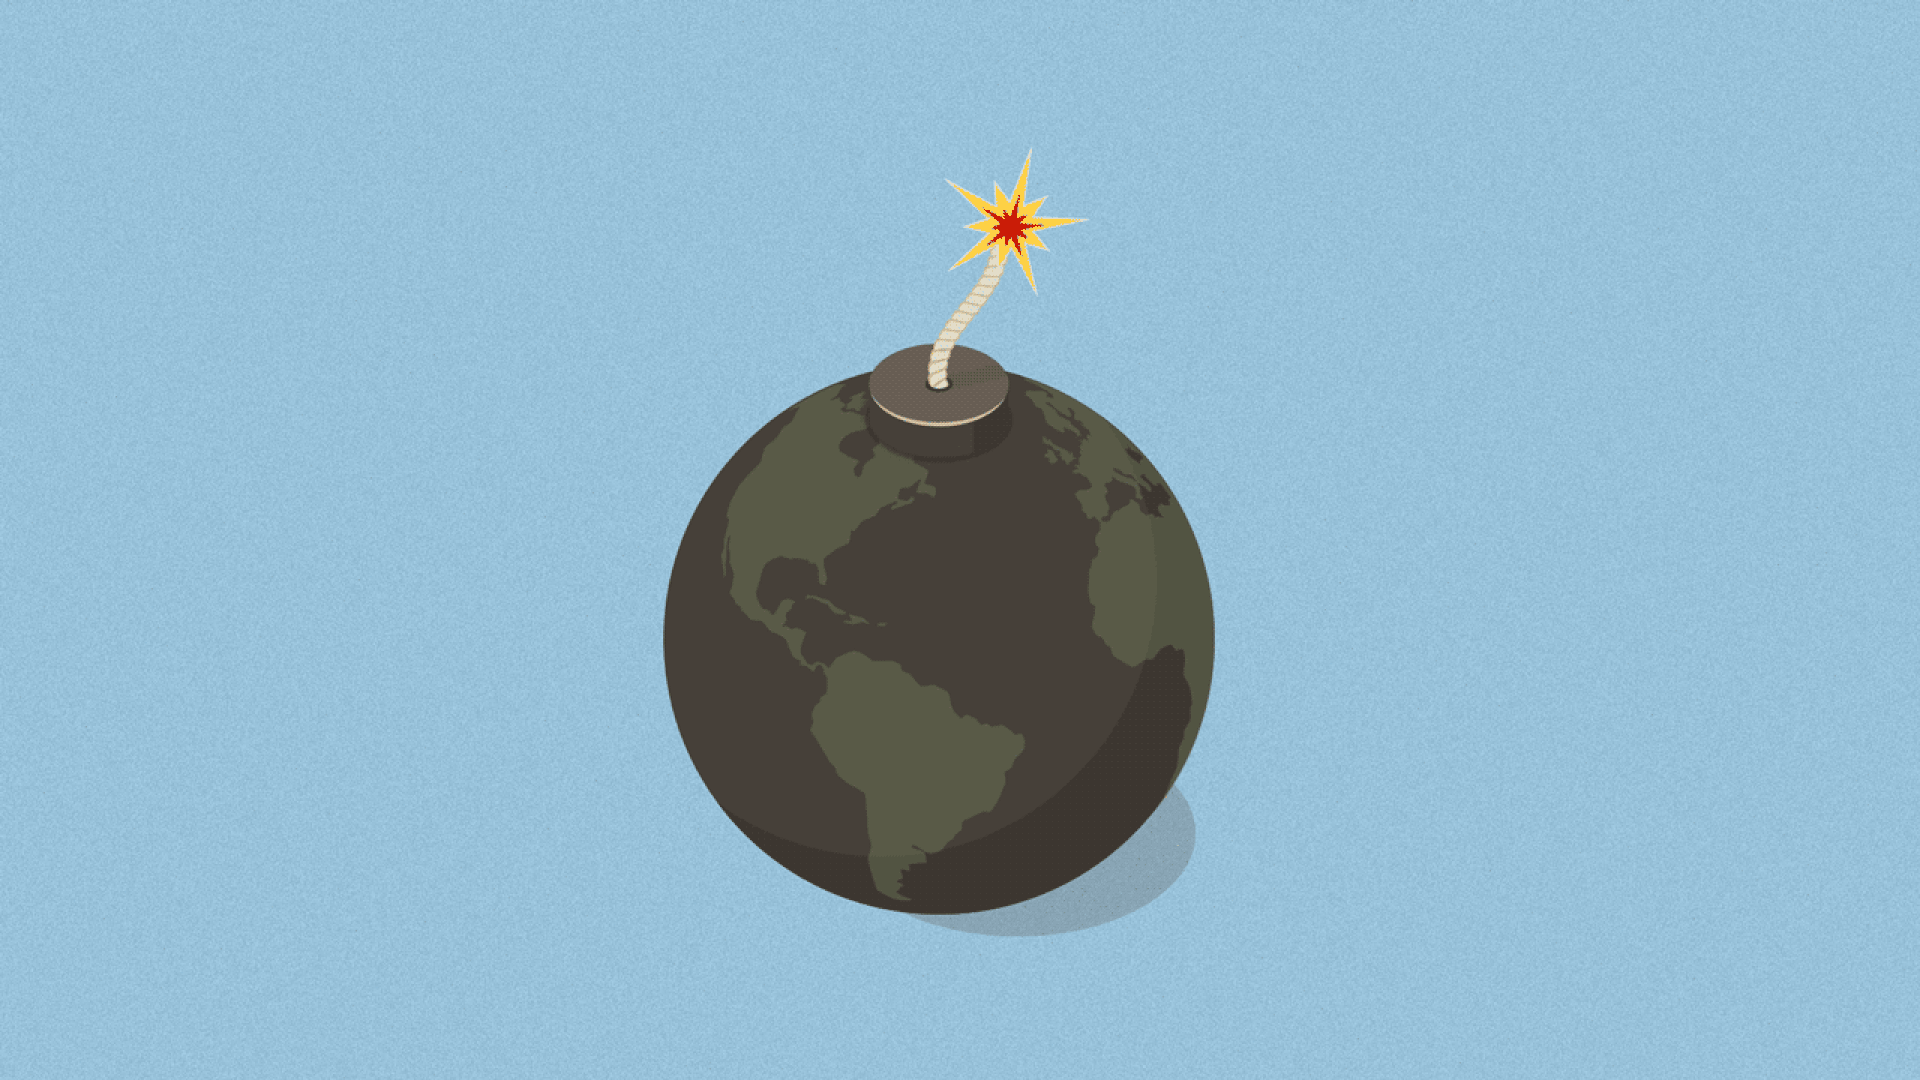 Illustration of the world as a bomb that almost explodes